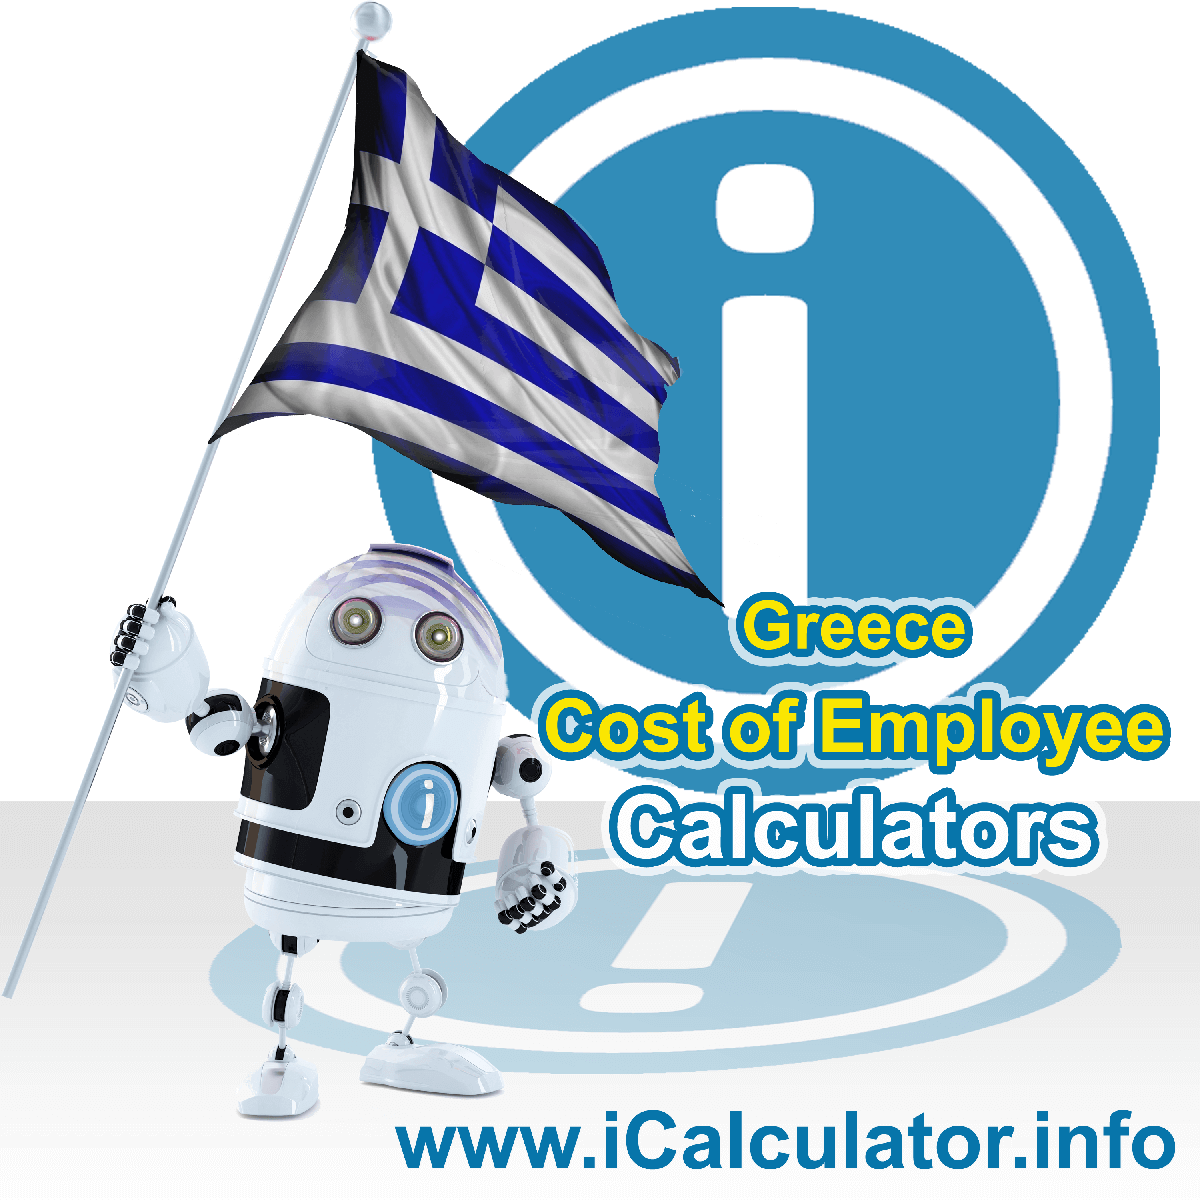 True Cost of an Employee in Greece Calculator. This image shows a new employer in Greece looking hiring a new employee, they calculate the cost of hiring an employee in Greece using the True Cost of an Employee in Greece calculator to understand their employment cost in Greece in 2023